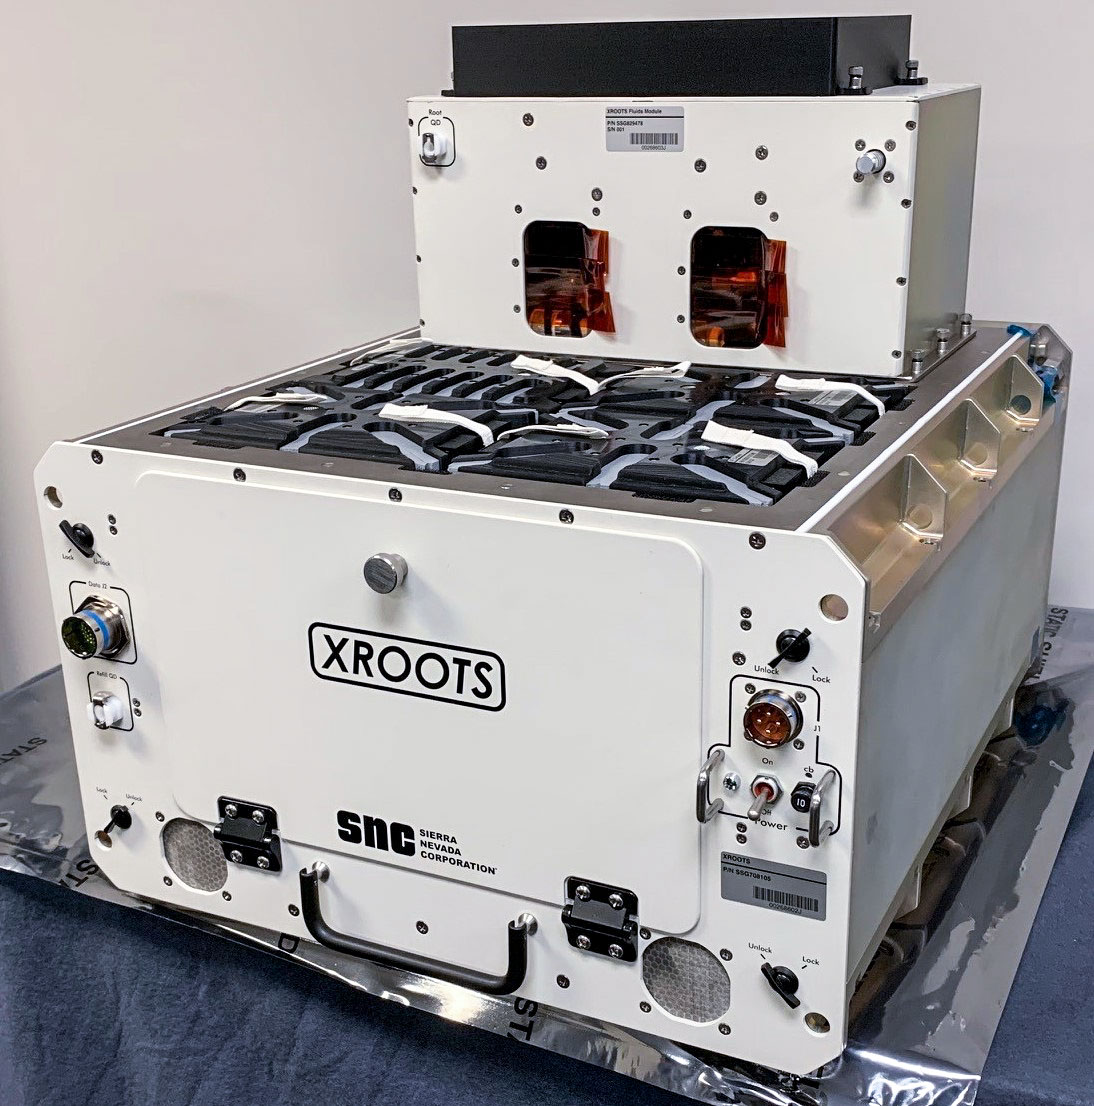 The eXposed Root On-Orbit Test System (XROOTS) investigation uses hydroponic and aeroponic techniques to grow plants without soil or other growth media. Results could identify suitable methods to produce crops on a larger scale for future space missions.